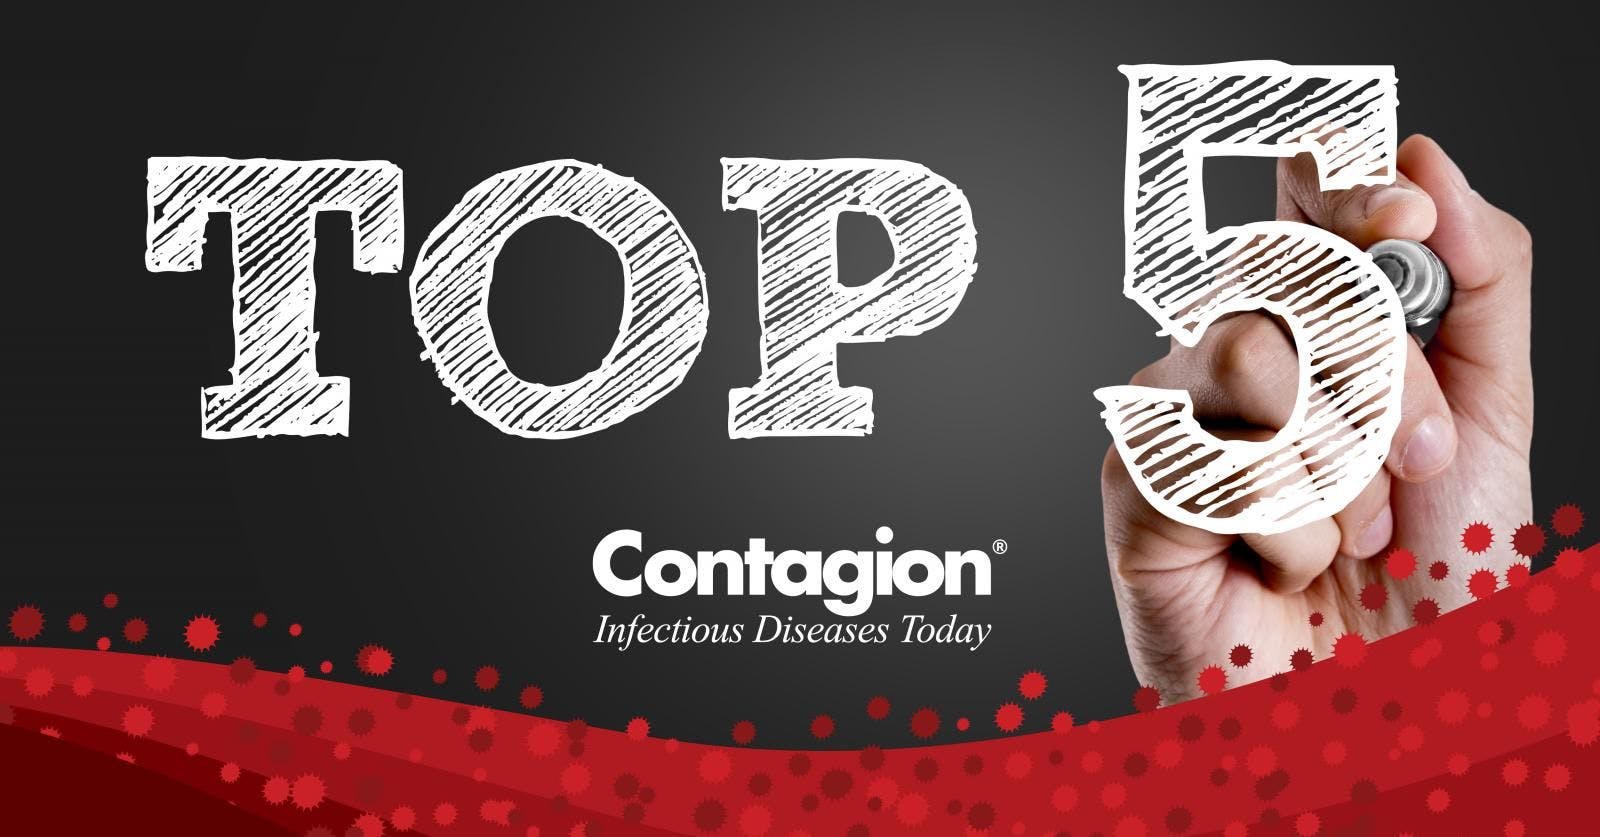 Top Infectious Disease News of the Week&mdash;January 12, 2020